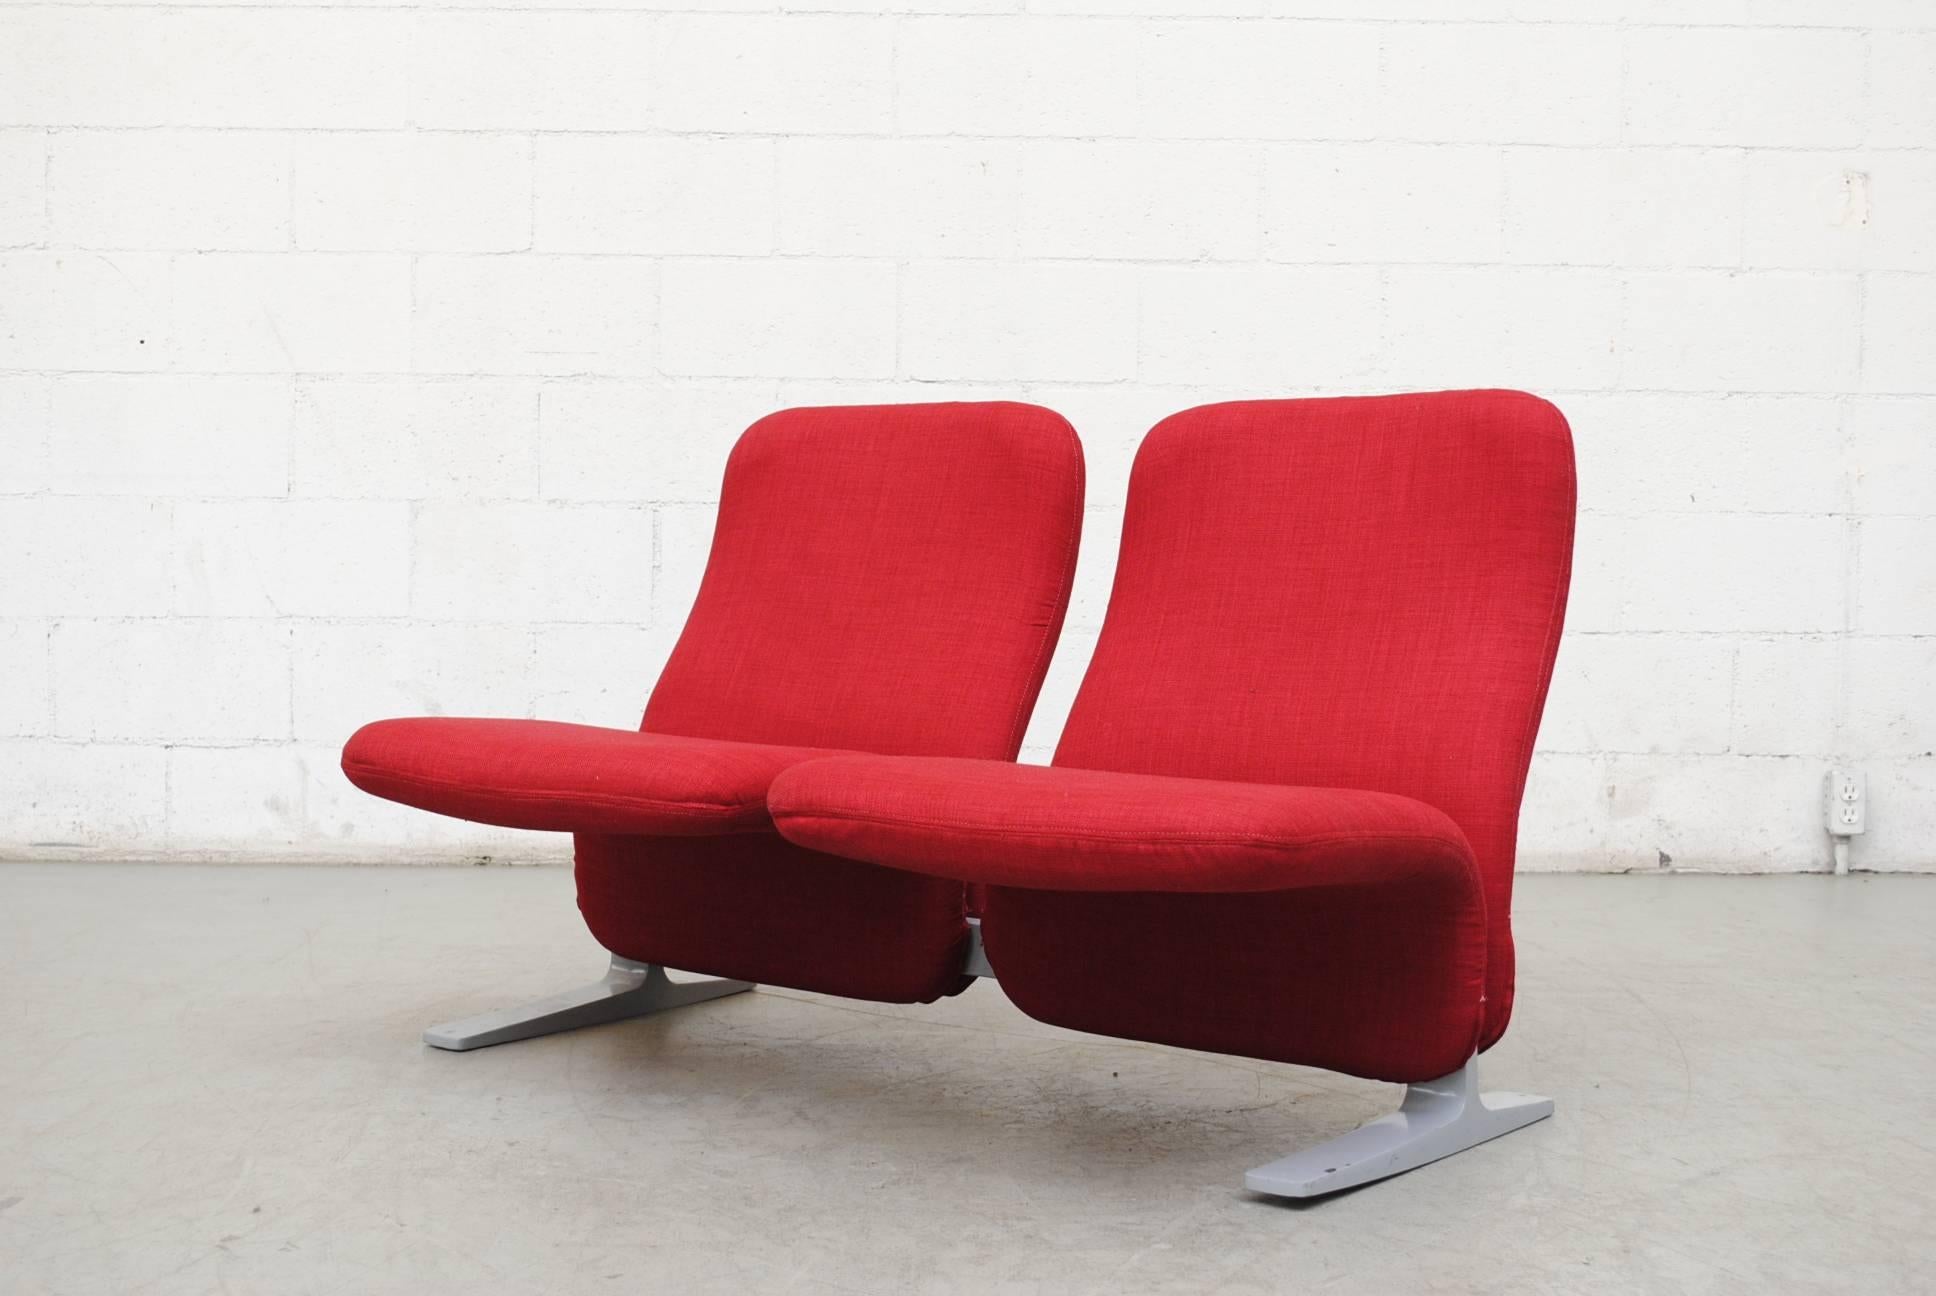 A smaller version to the high back F784 Concorde chair by Pierre Paulin. Named after the French Concorde Aircraft, Paulin designed these seats for their waiting room. Comfortable and minimal, it is also referred to as the Duck chair. This quack is